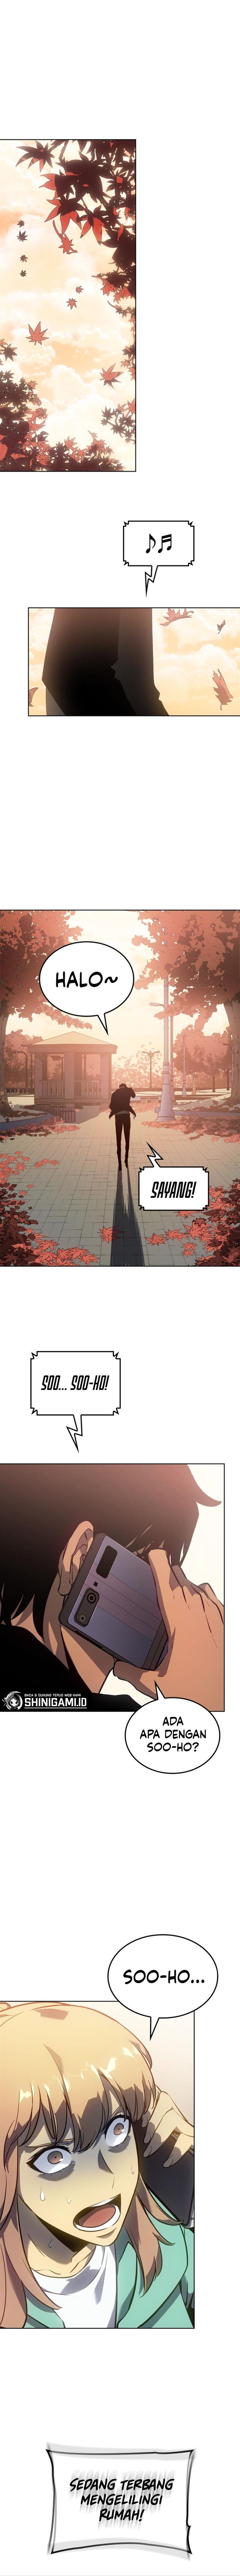 Solo Leveling Side Story Chapter 12 - 167